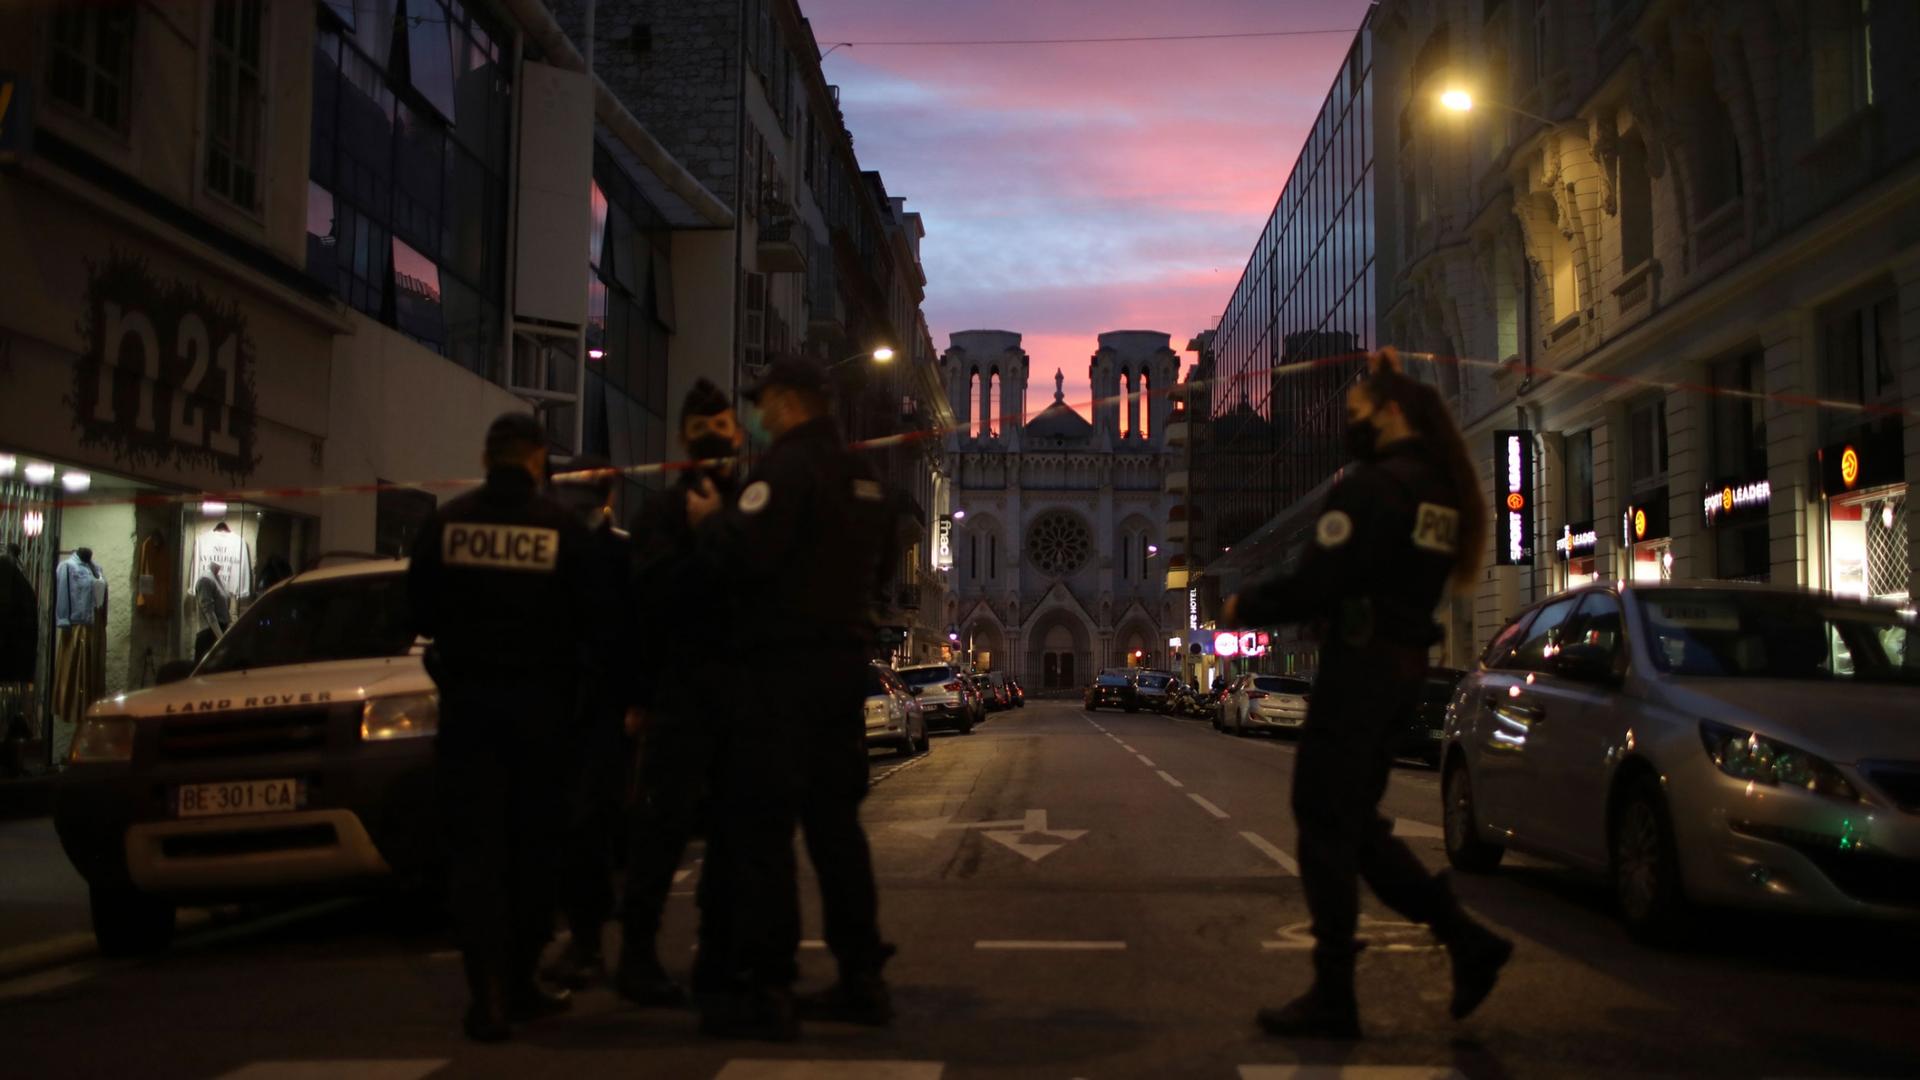 Several police are shown at the end of a street with the Notre Dame church in the distance and the sun setting.